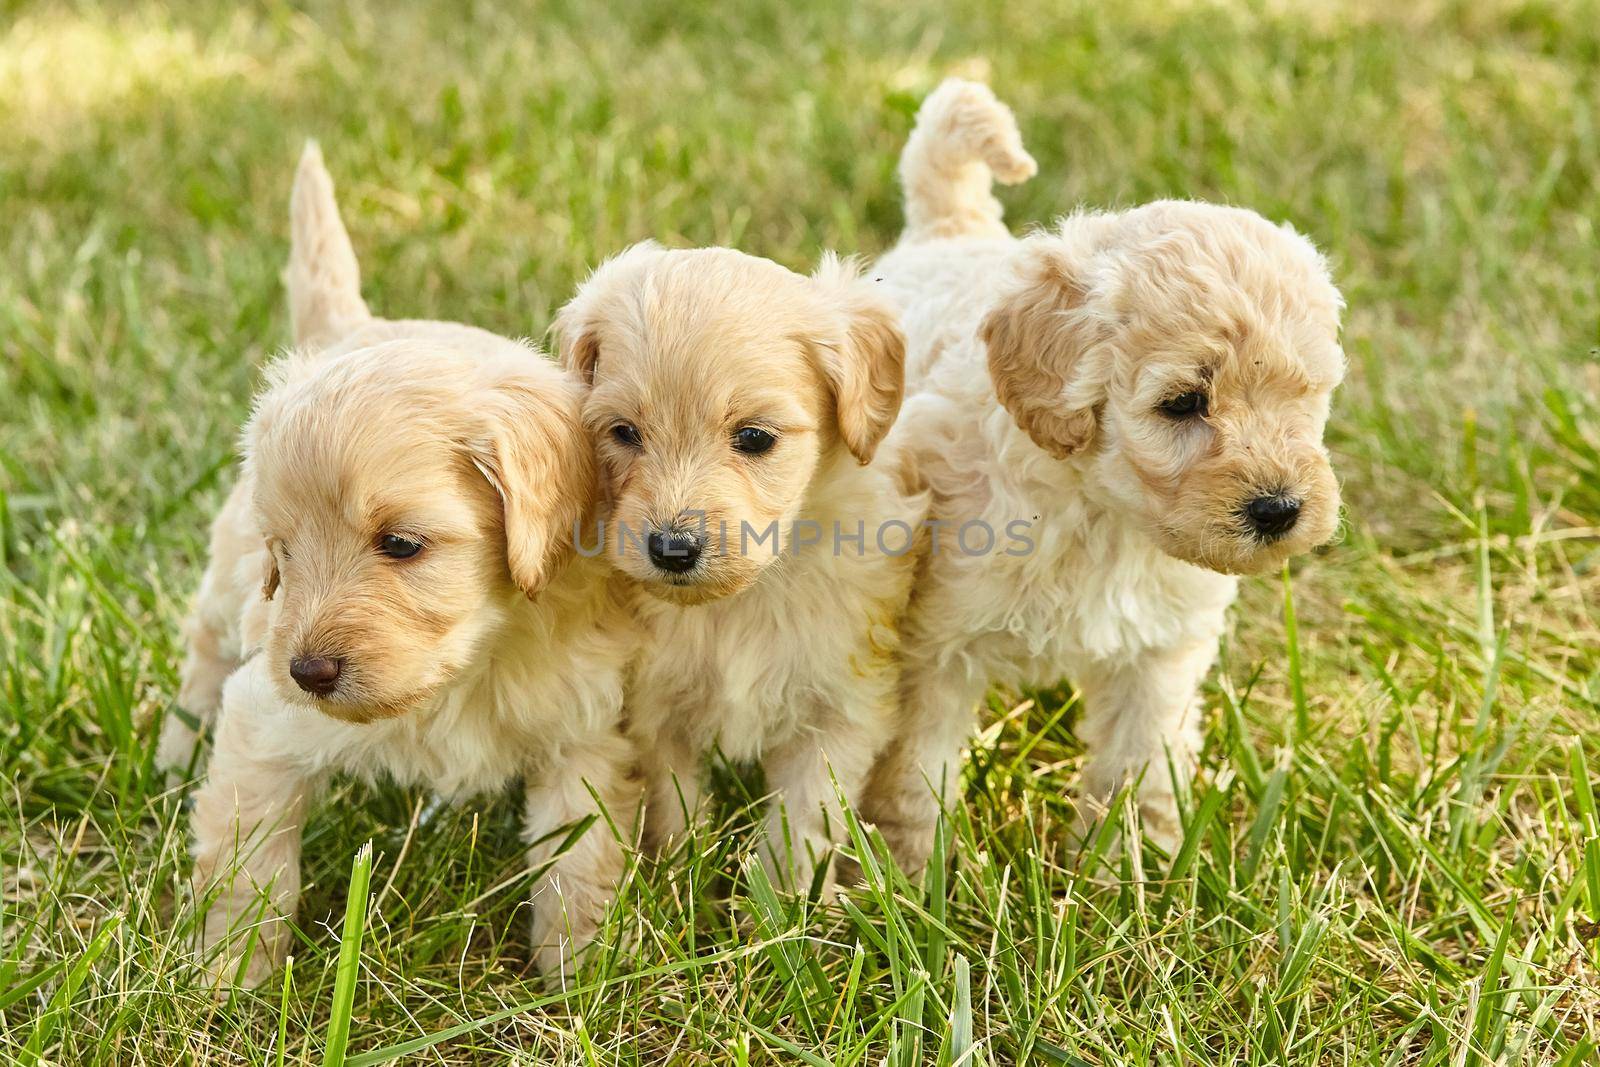 Image of Three tiny and adorable Goldendoodle puppies together in the grass